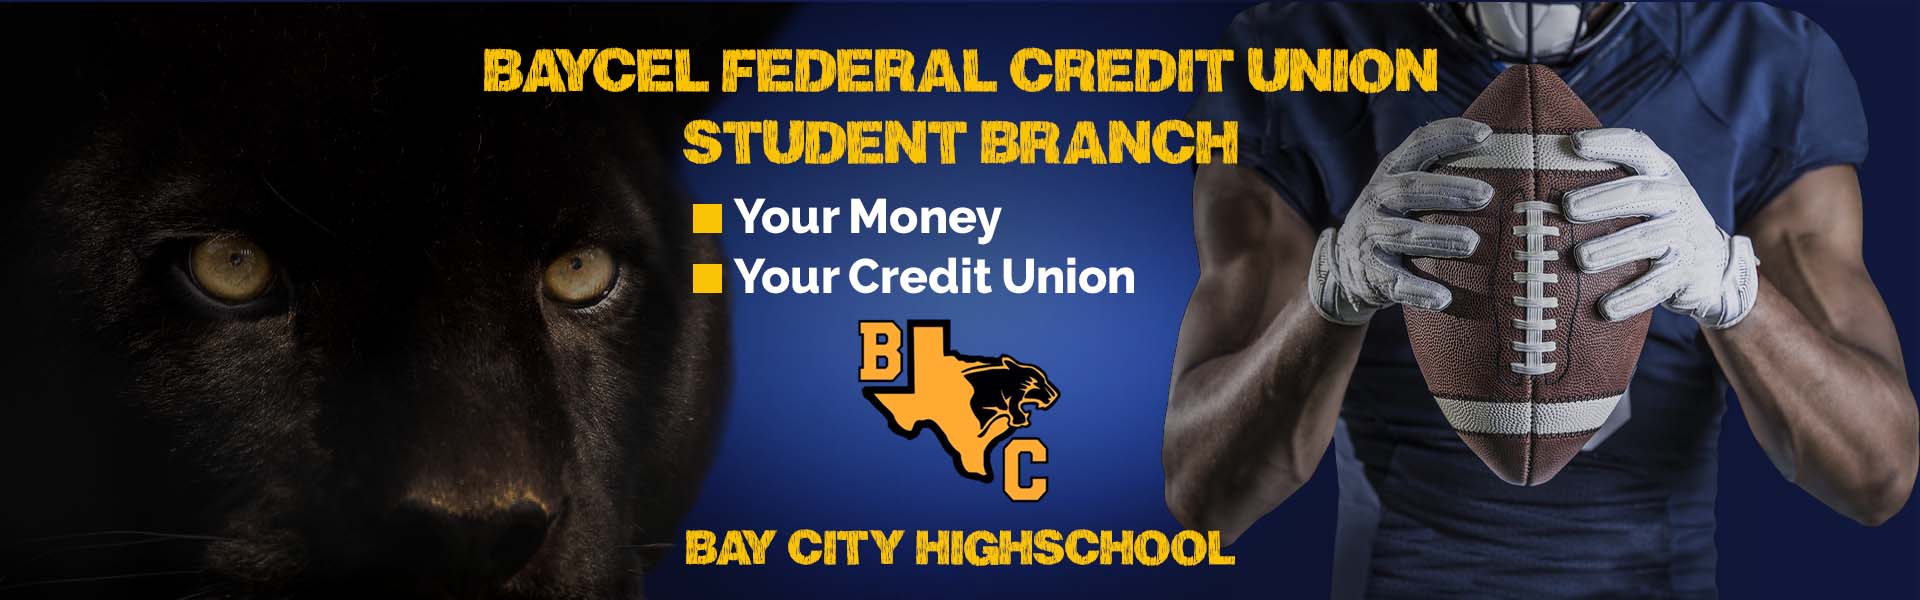 Promotion for new Bay City Highschool branch Banner